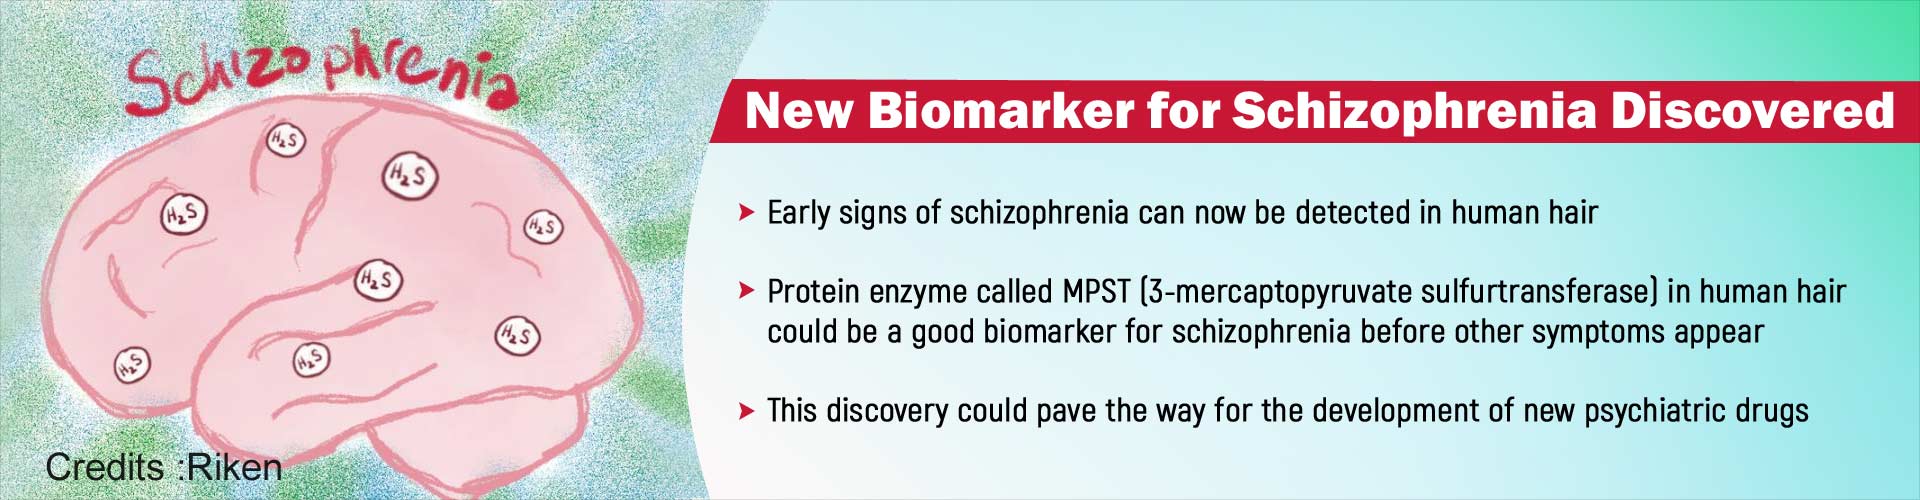 New Biomarker for Schizophrenia Discovered. Early signs of schizophrenia can now be detected in human hair. Protein enzyme called MPST (3-mercaptopyruvate sulfurtransferase) in human hair could be a good biomarker for schizophrenia before other symptoms appear. This discovery could pave the way for the development of new psychiatric drugs.